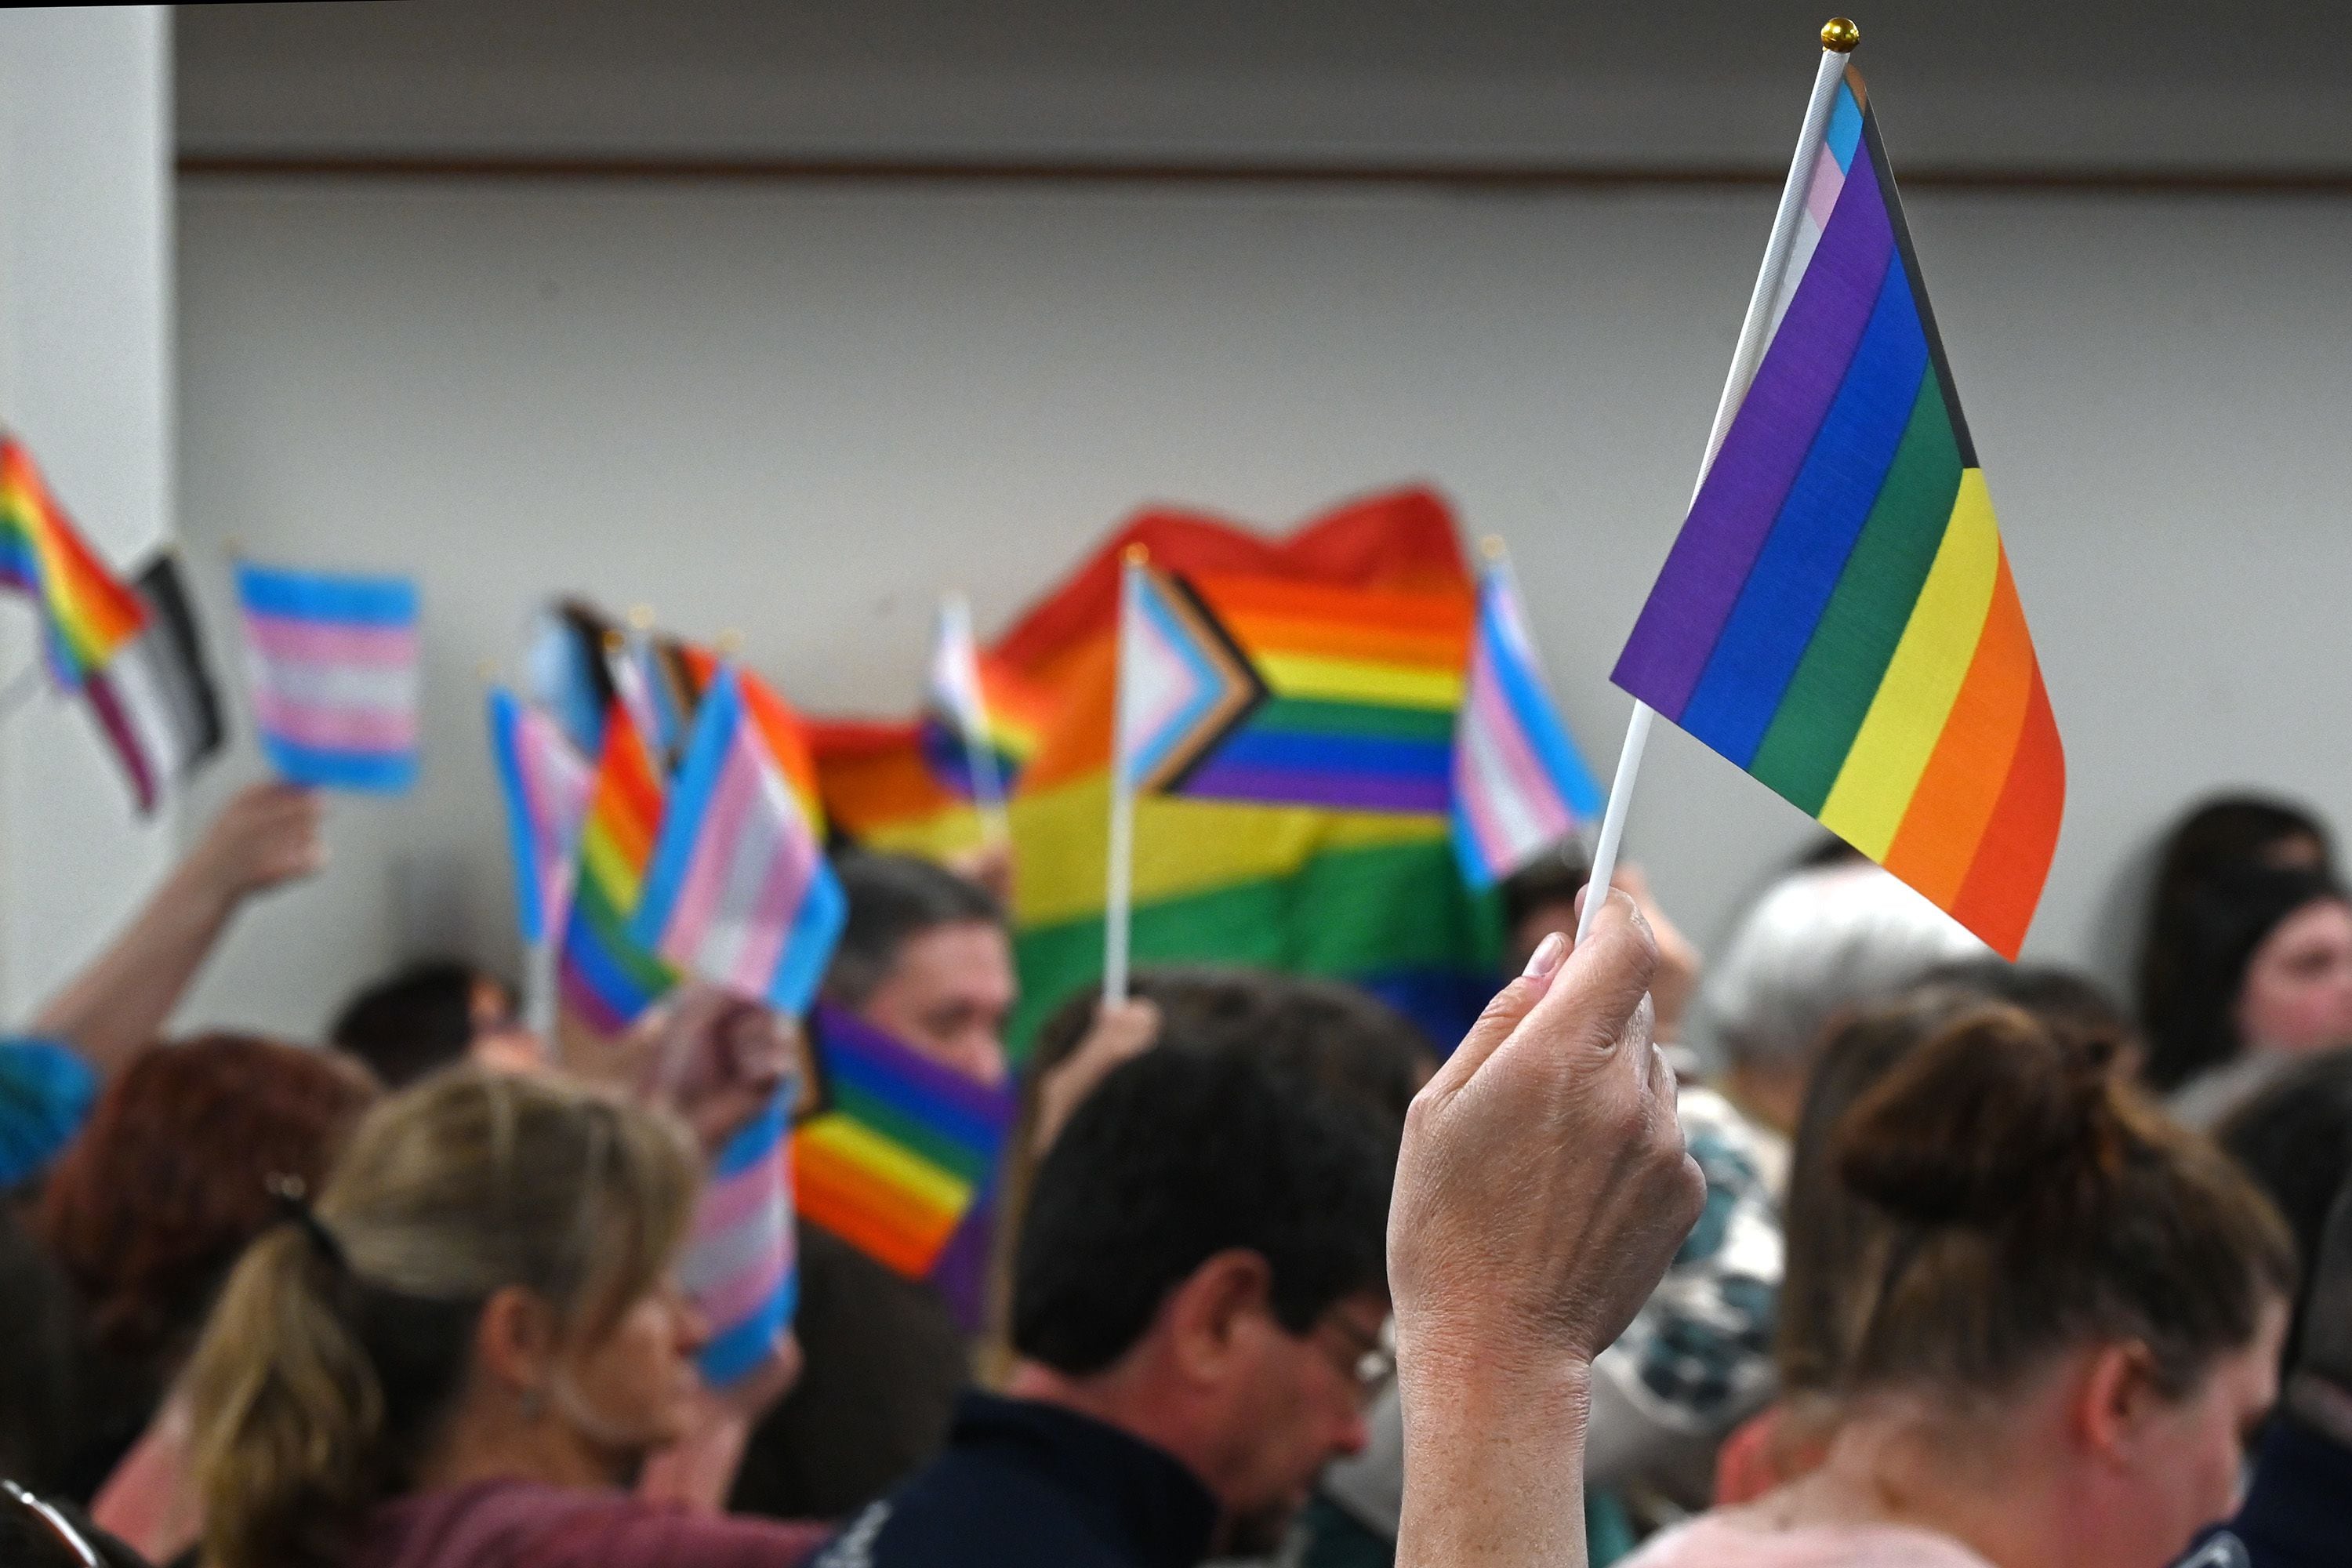 Waving proudly: Learn the meanings behind LGBT flags The Daily The